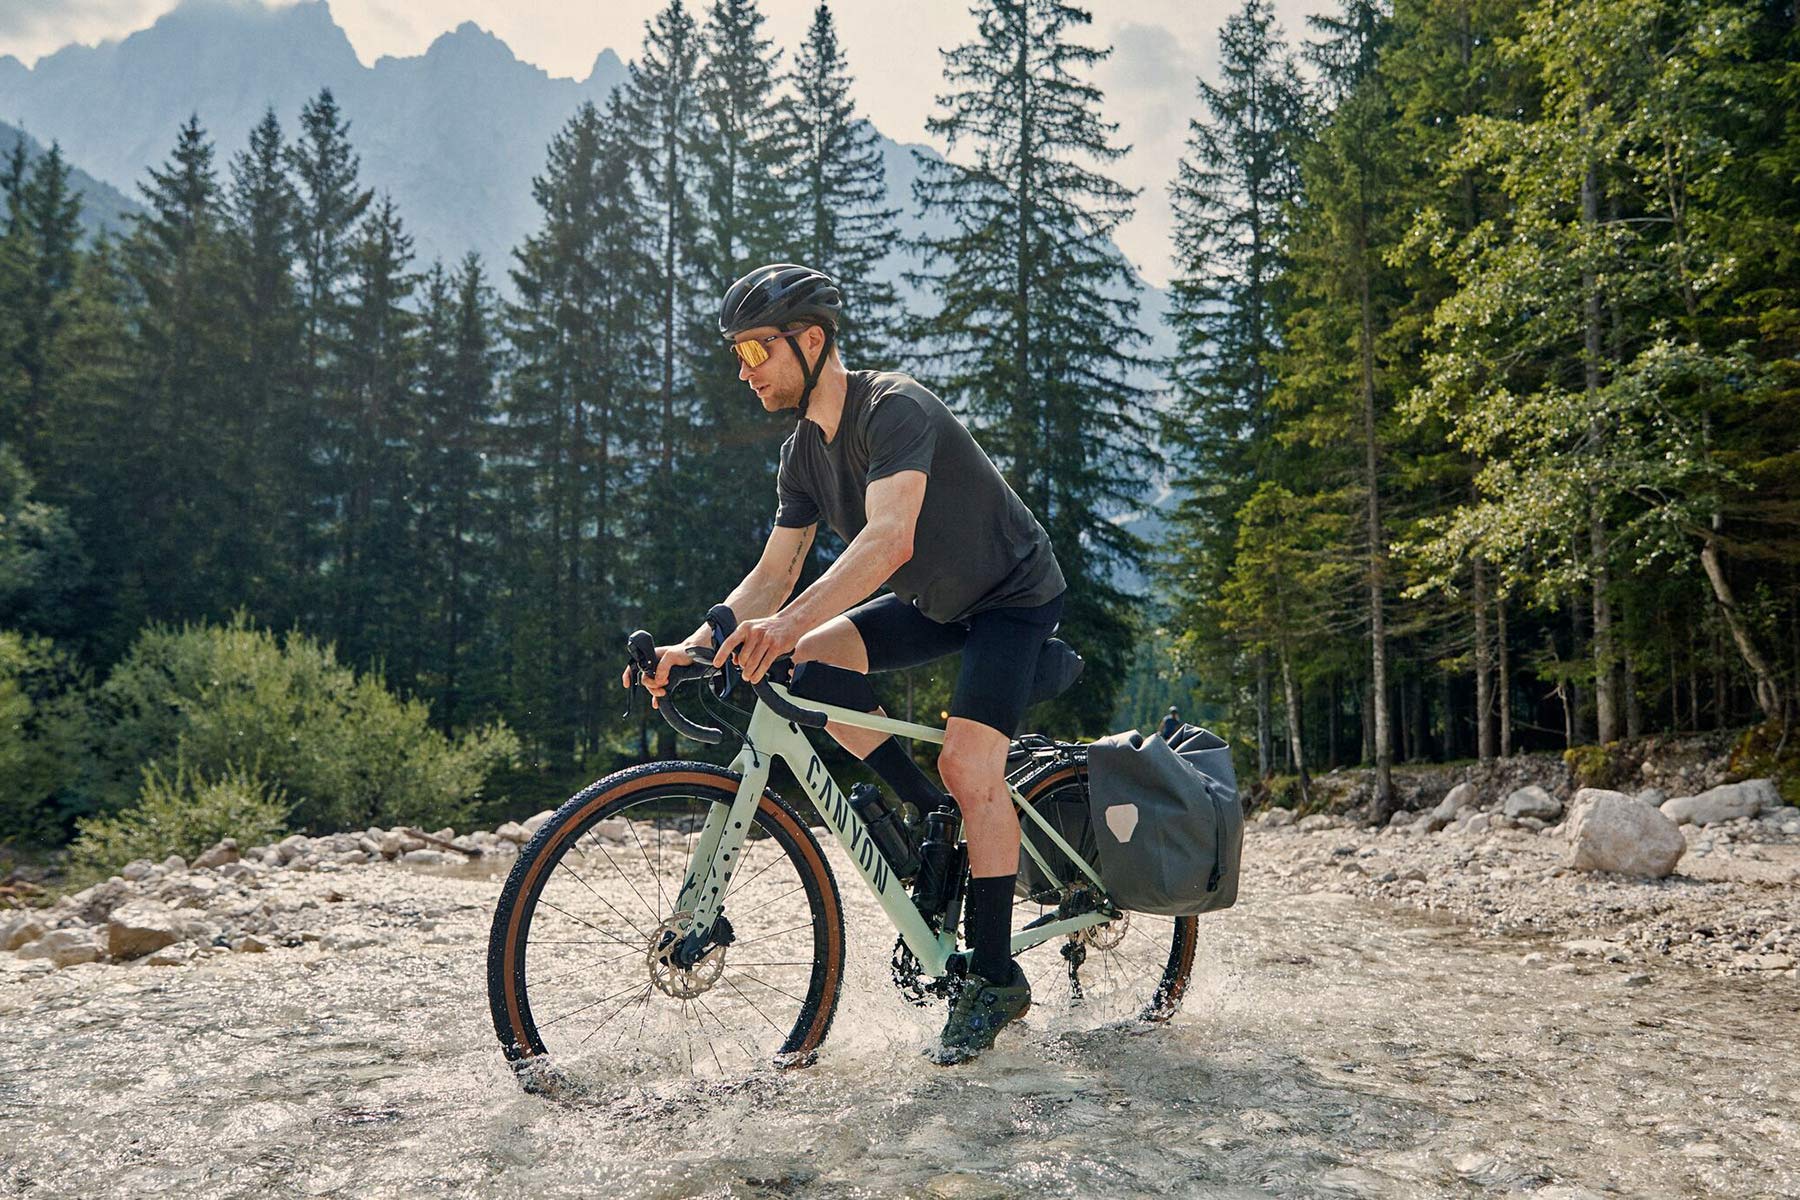 Canyon Grizl AL affordable alloy adventure gravel bike, photo by Marco Freudenreich, river crossing Slovenia